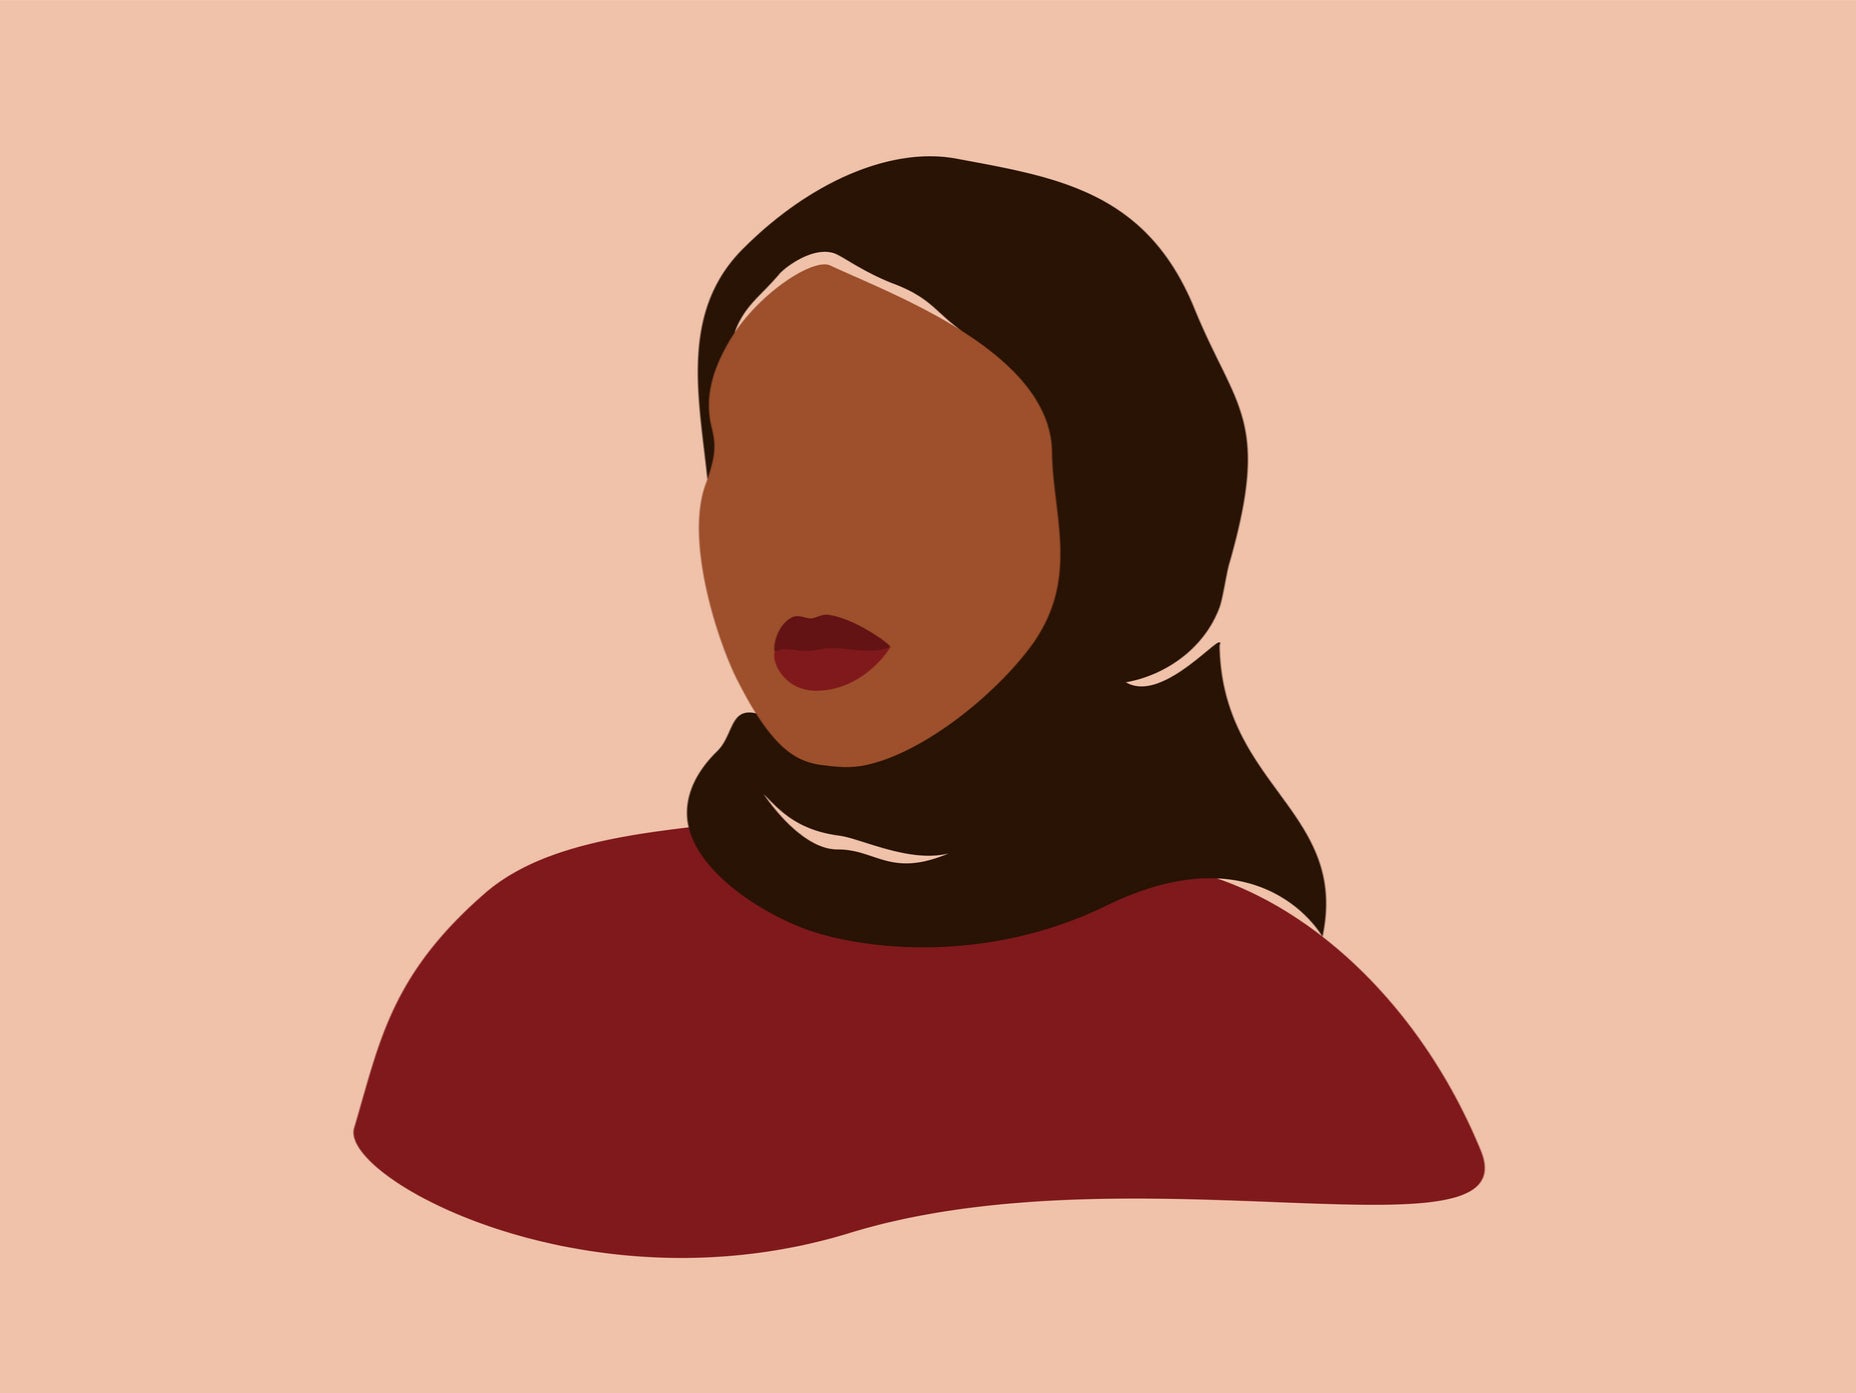 A silhouette of a Muslim woman wearing a hijab